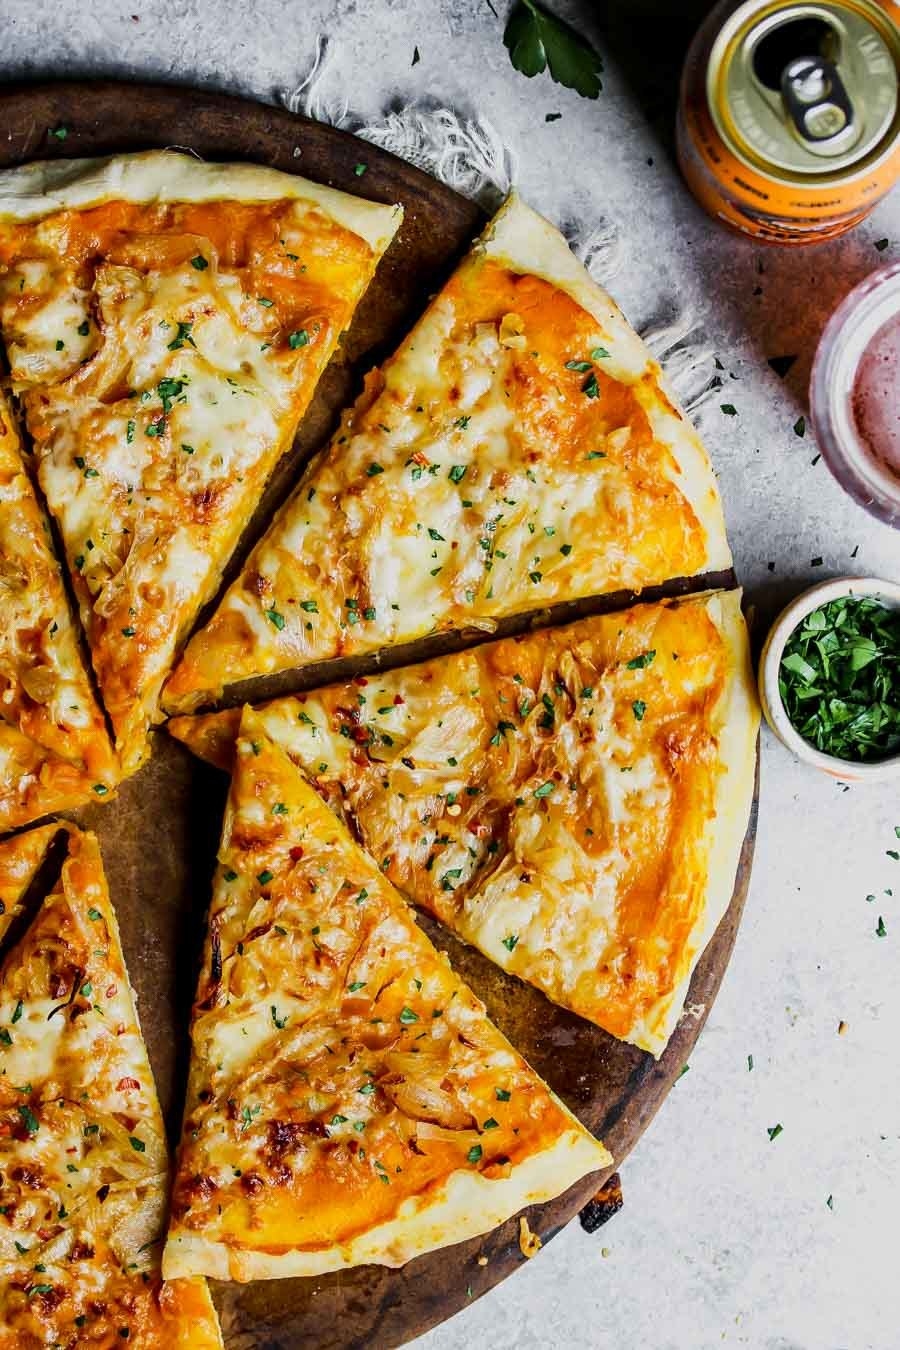 A pumpkin and gouda pizza cut into slices.